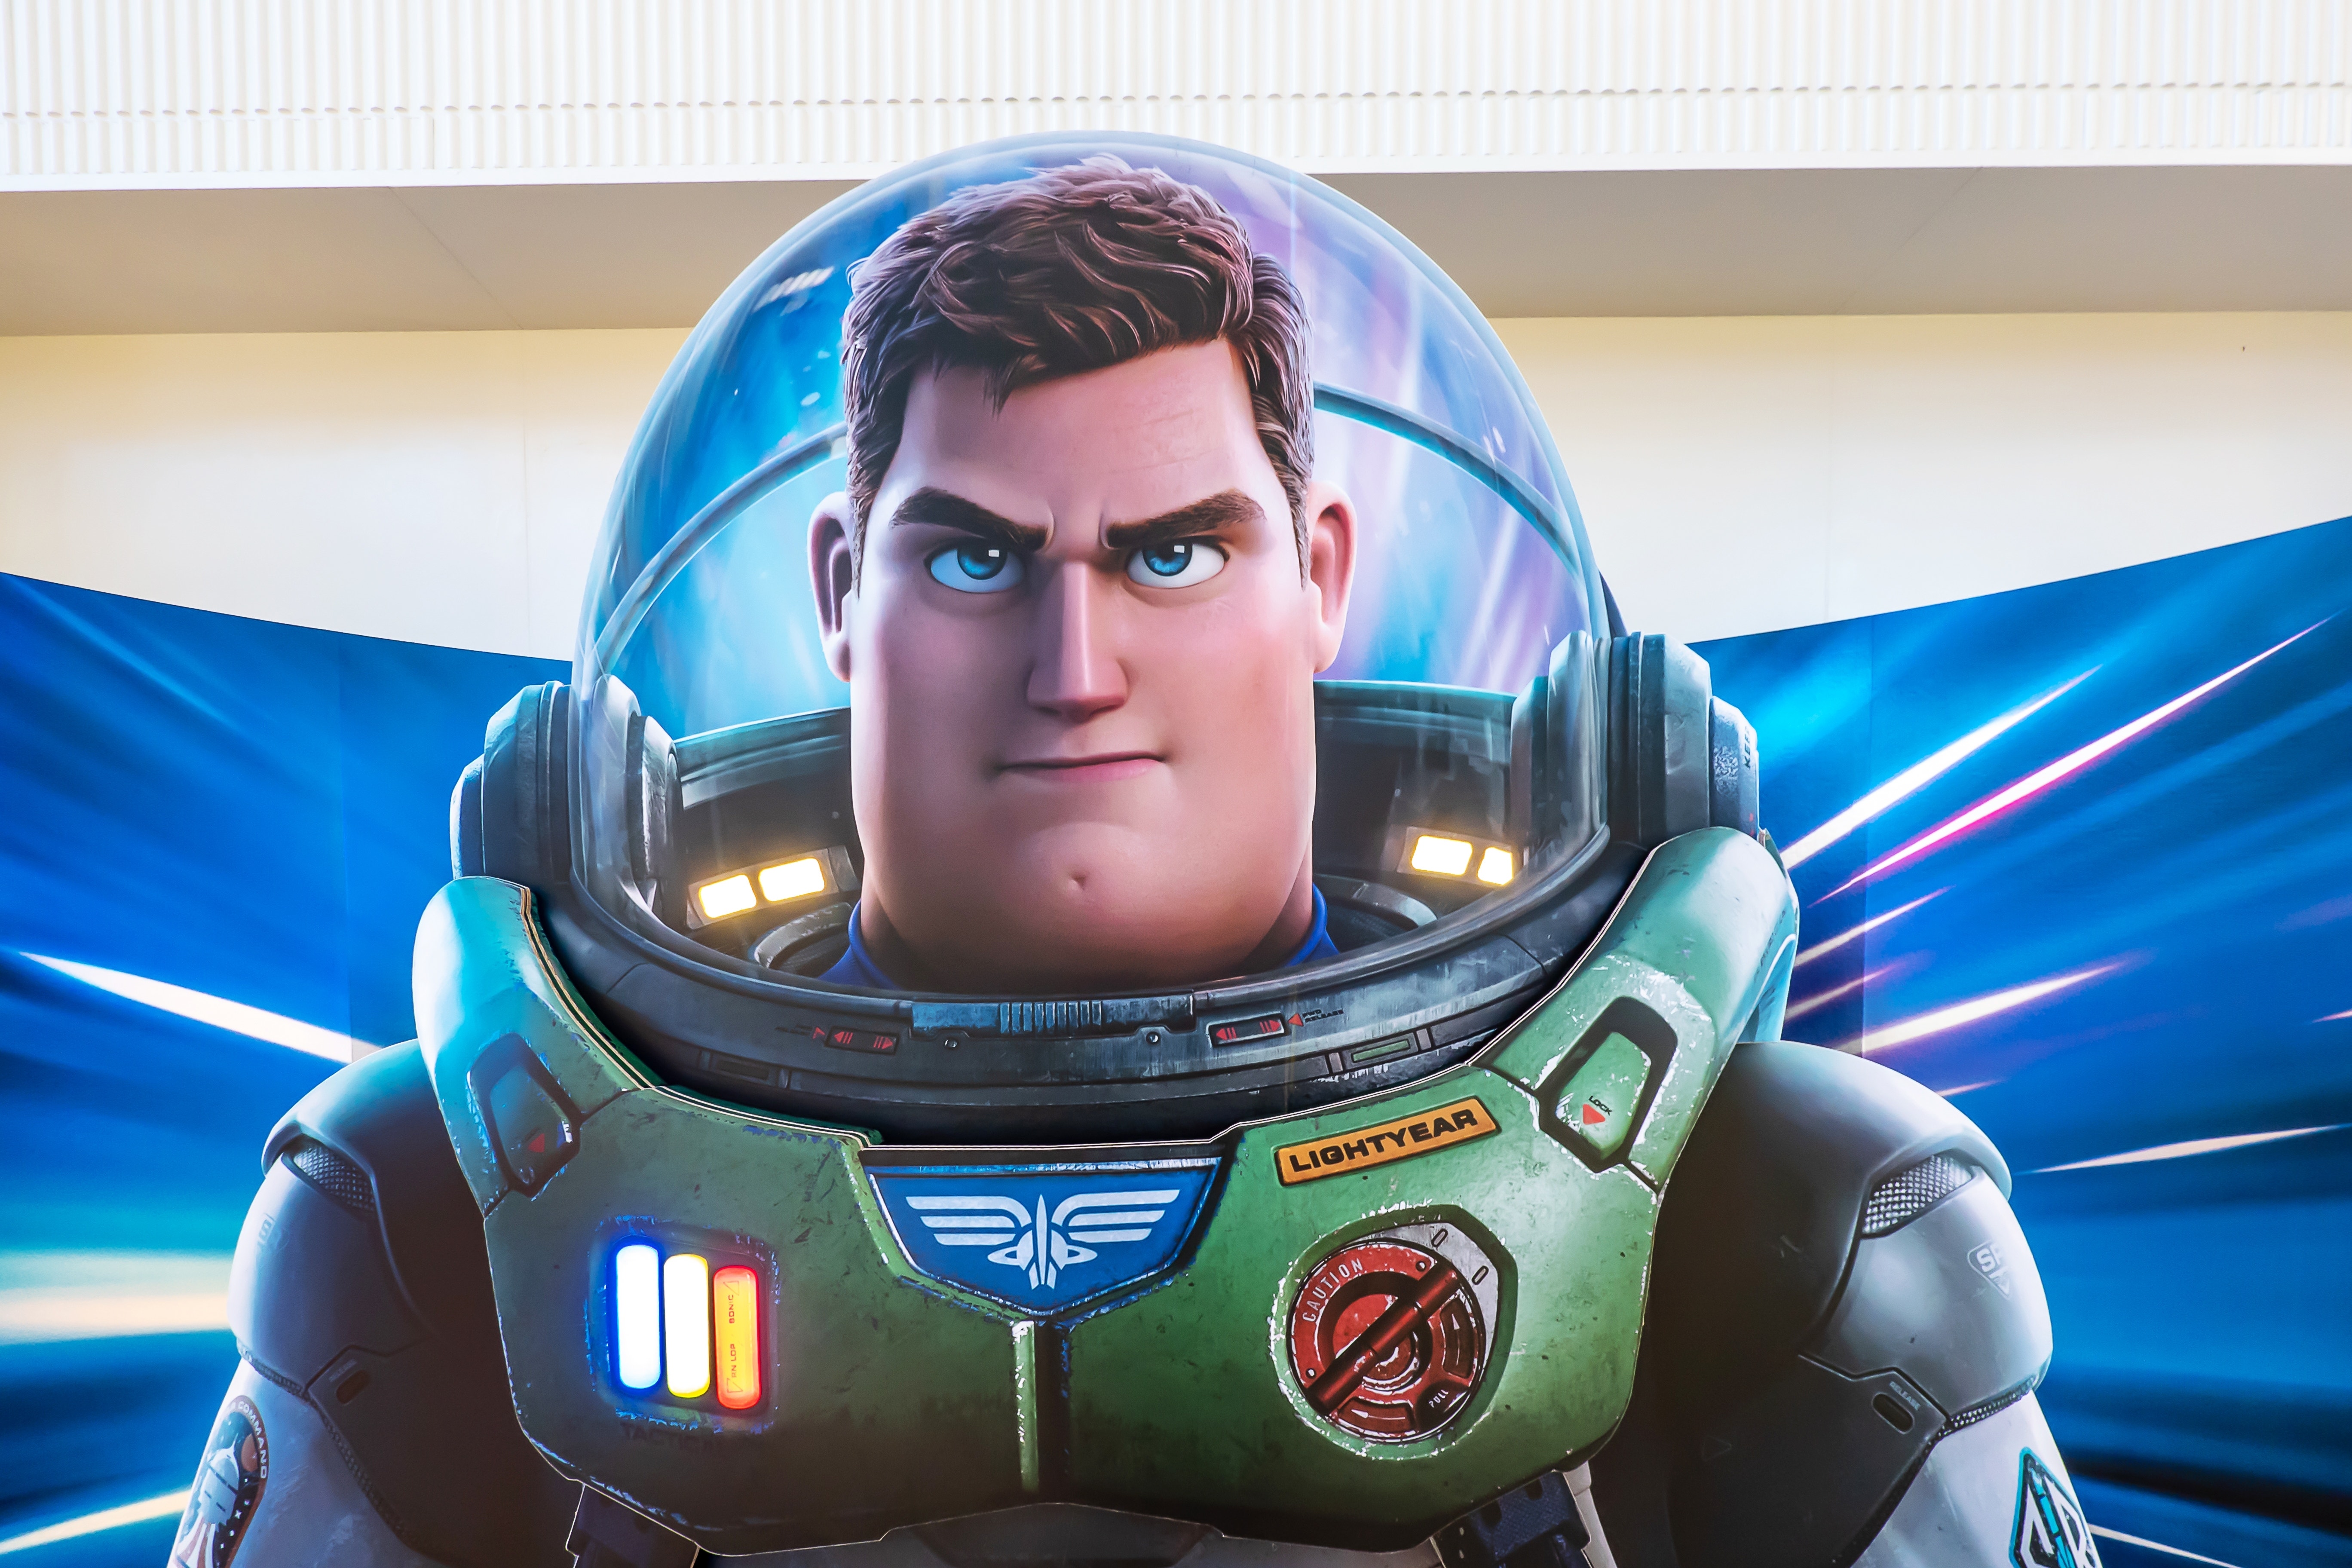 How Many People Watched 'Lightyear' On Disney+? Here Are The Estimates And How They Stack Up